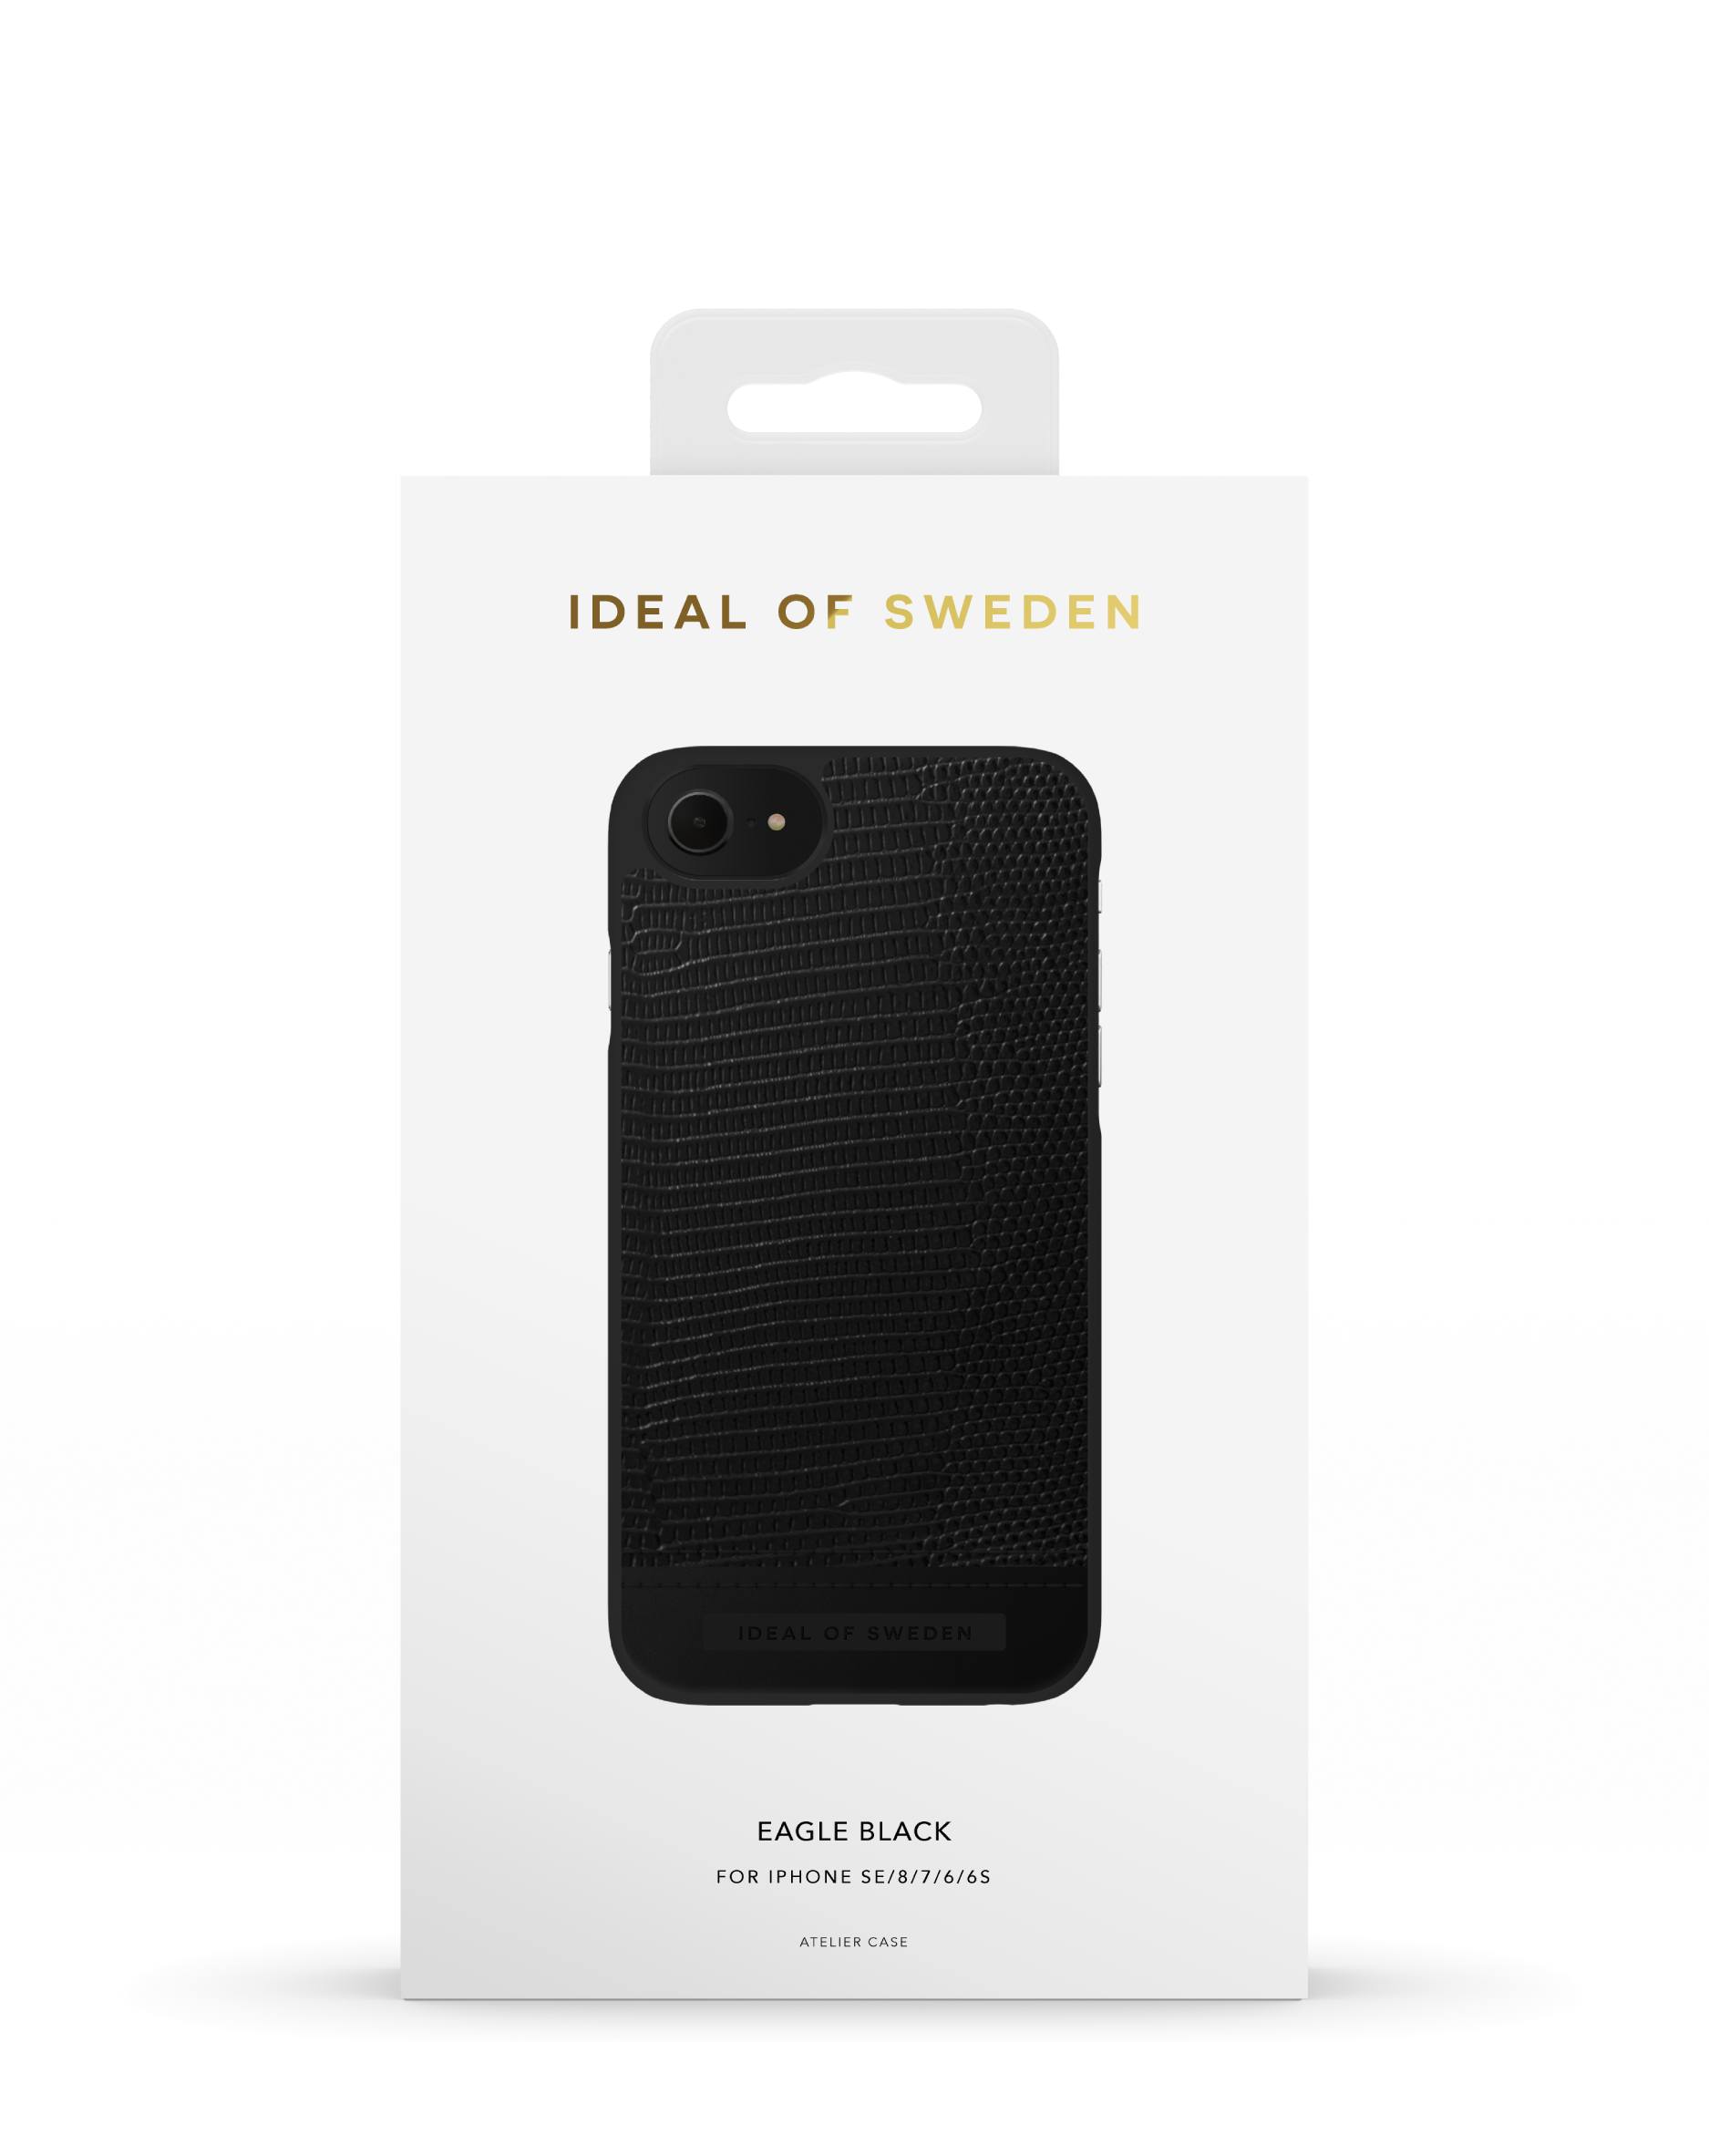 IDEAL OF SWEDEN SE 8, Apple Apple, Black 7, Apple Apple Apple Backcover, (2020), iPhone Eagle 6(S), IDACAW20-I7-229, iPhone iPhone iPhone